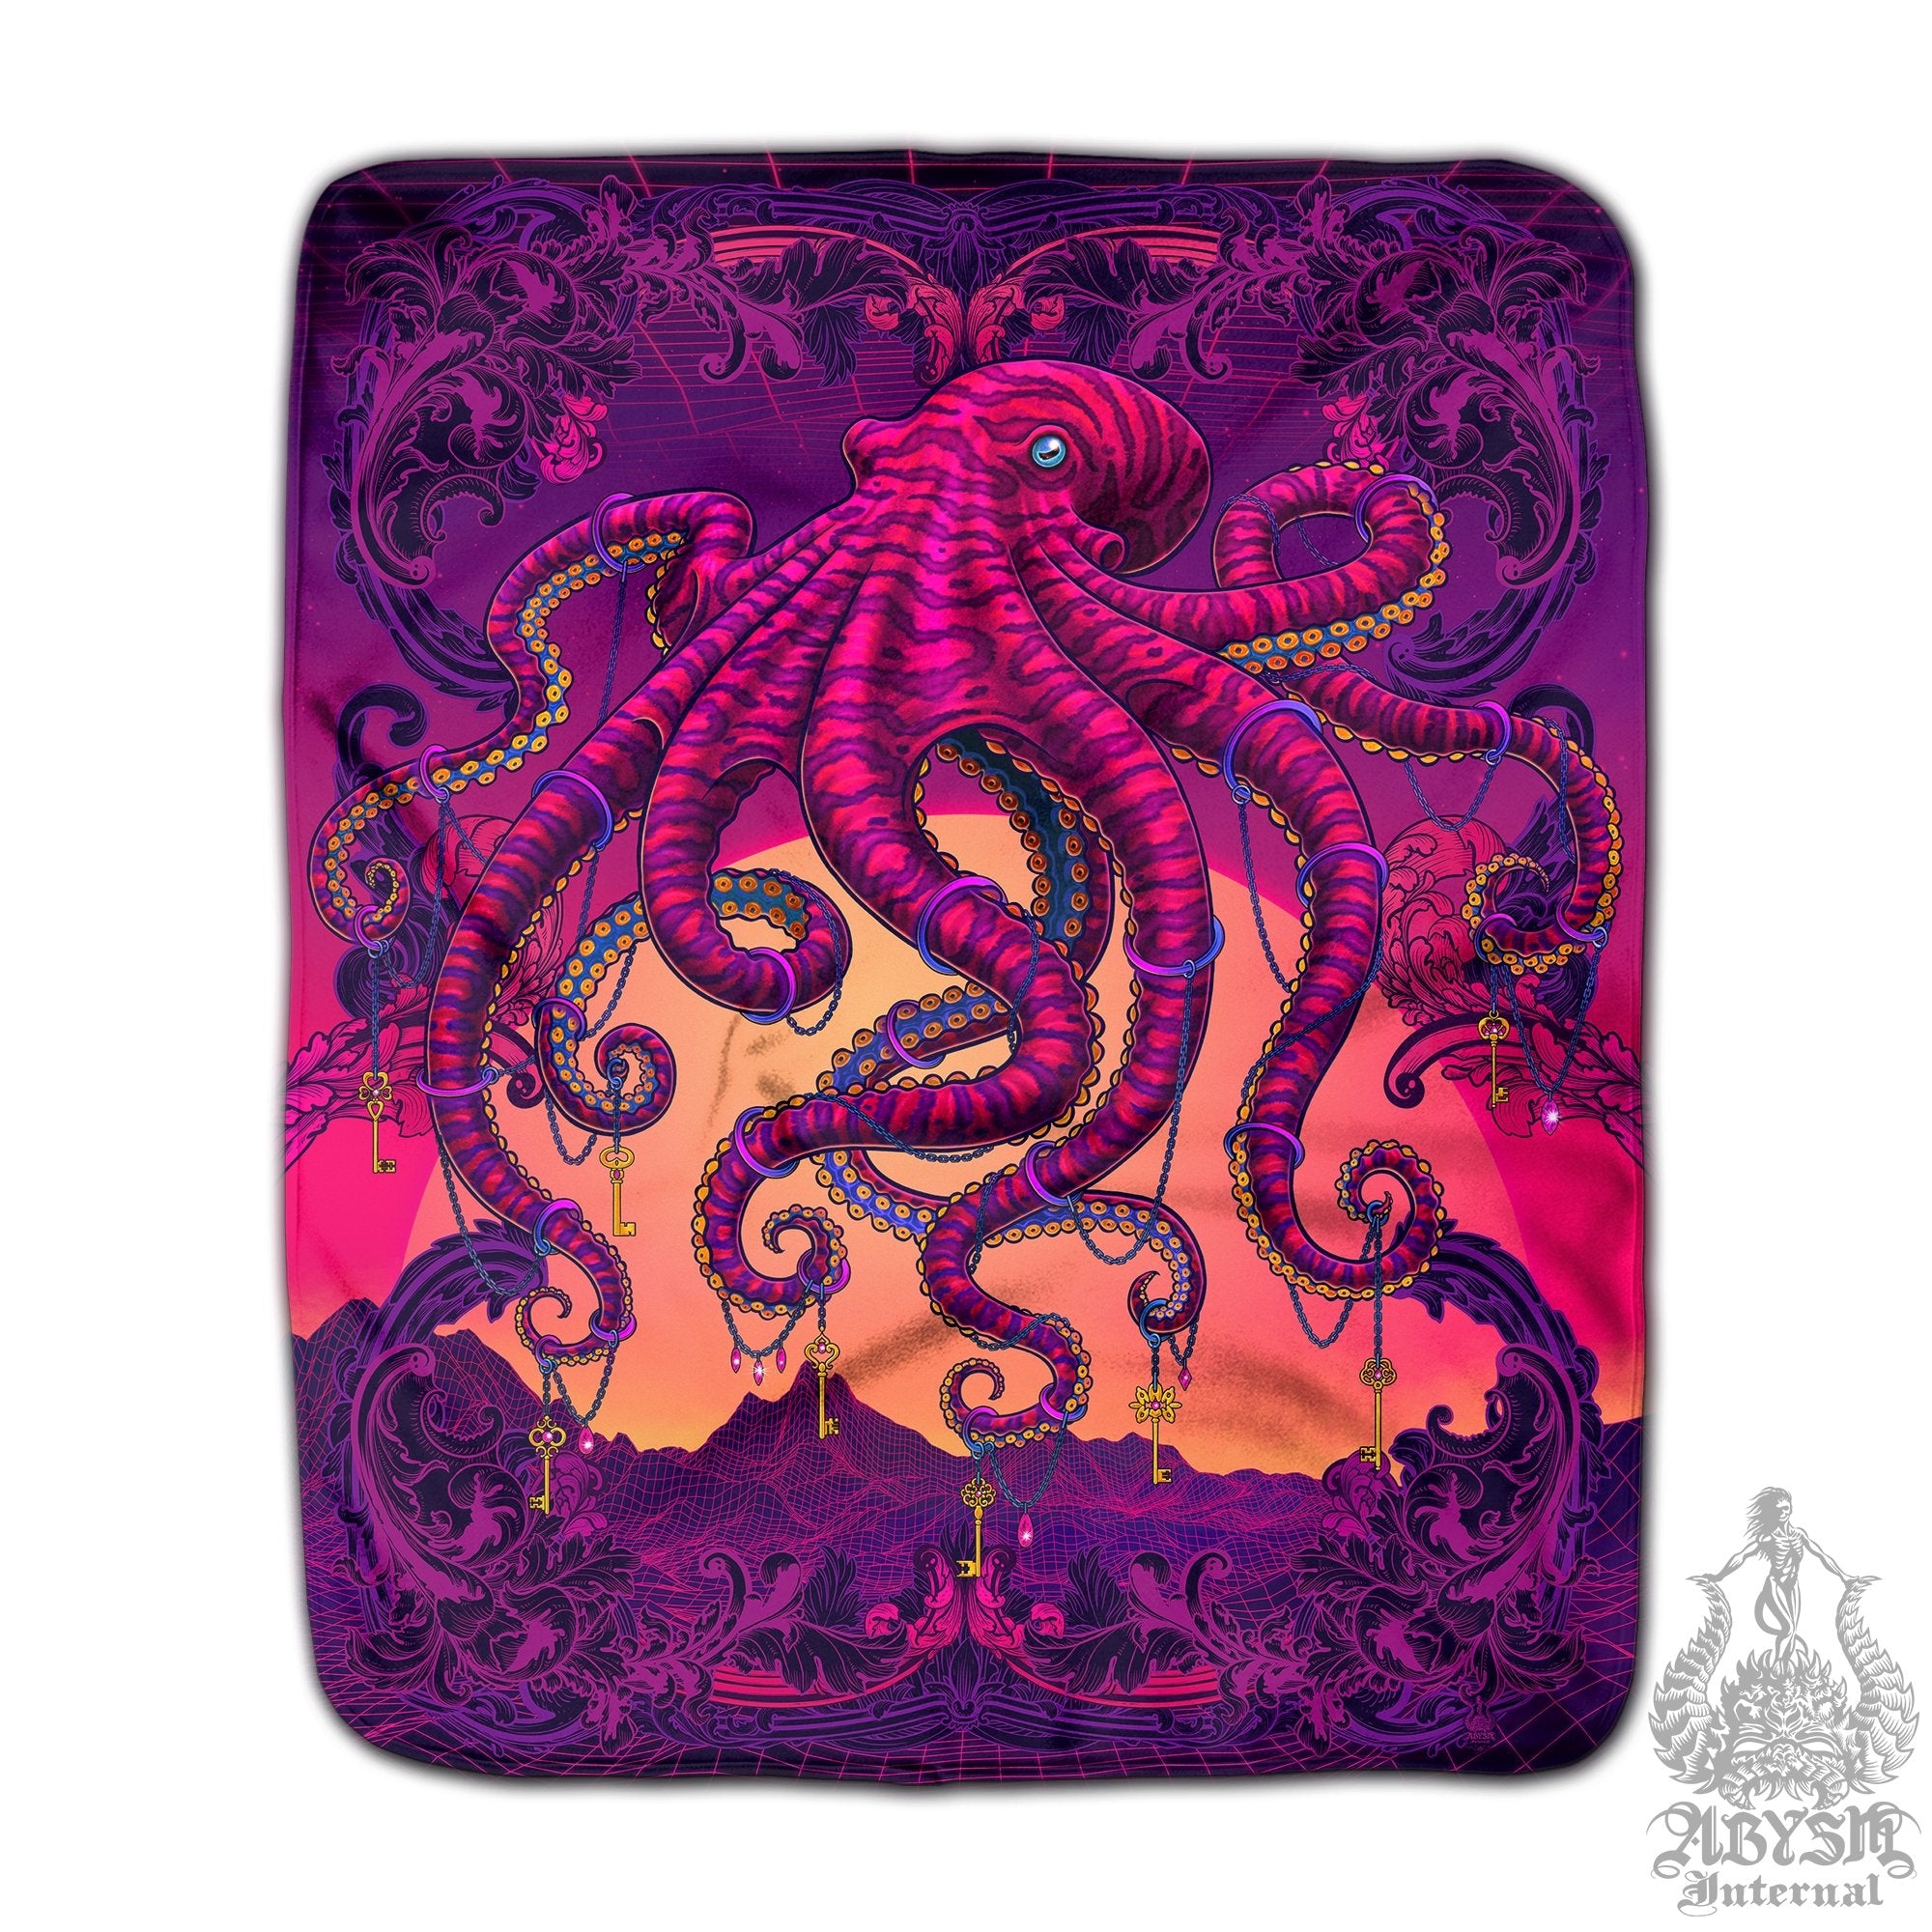 Vaporwave Throw Fleece Blanket, Retrowave Art, Psychedelic Home Decor, 80s Synthwave, Eclectic and Funky Gift for Kids - Octopus - Abysm Internal